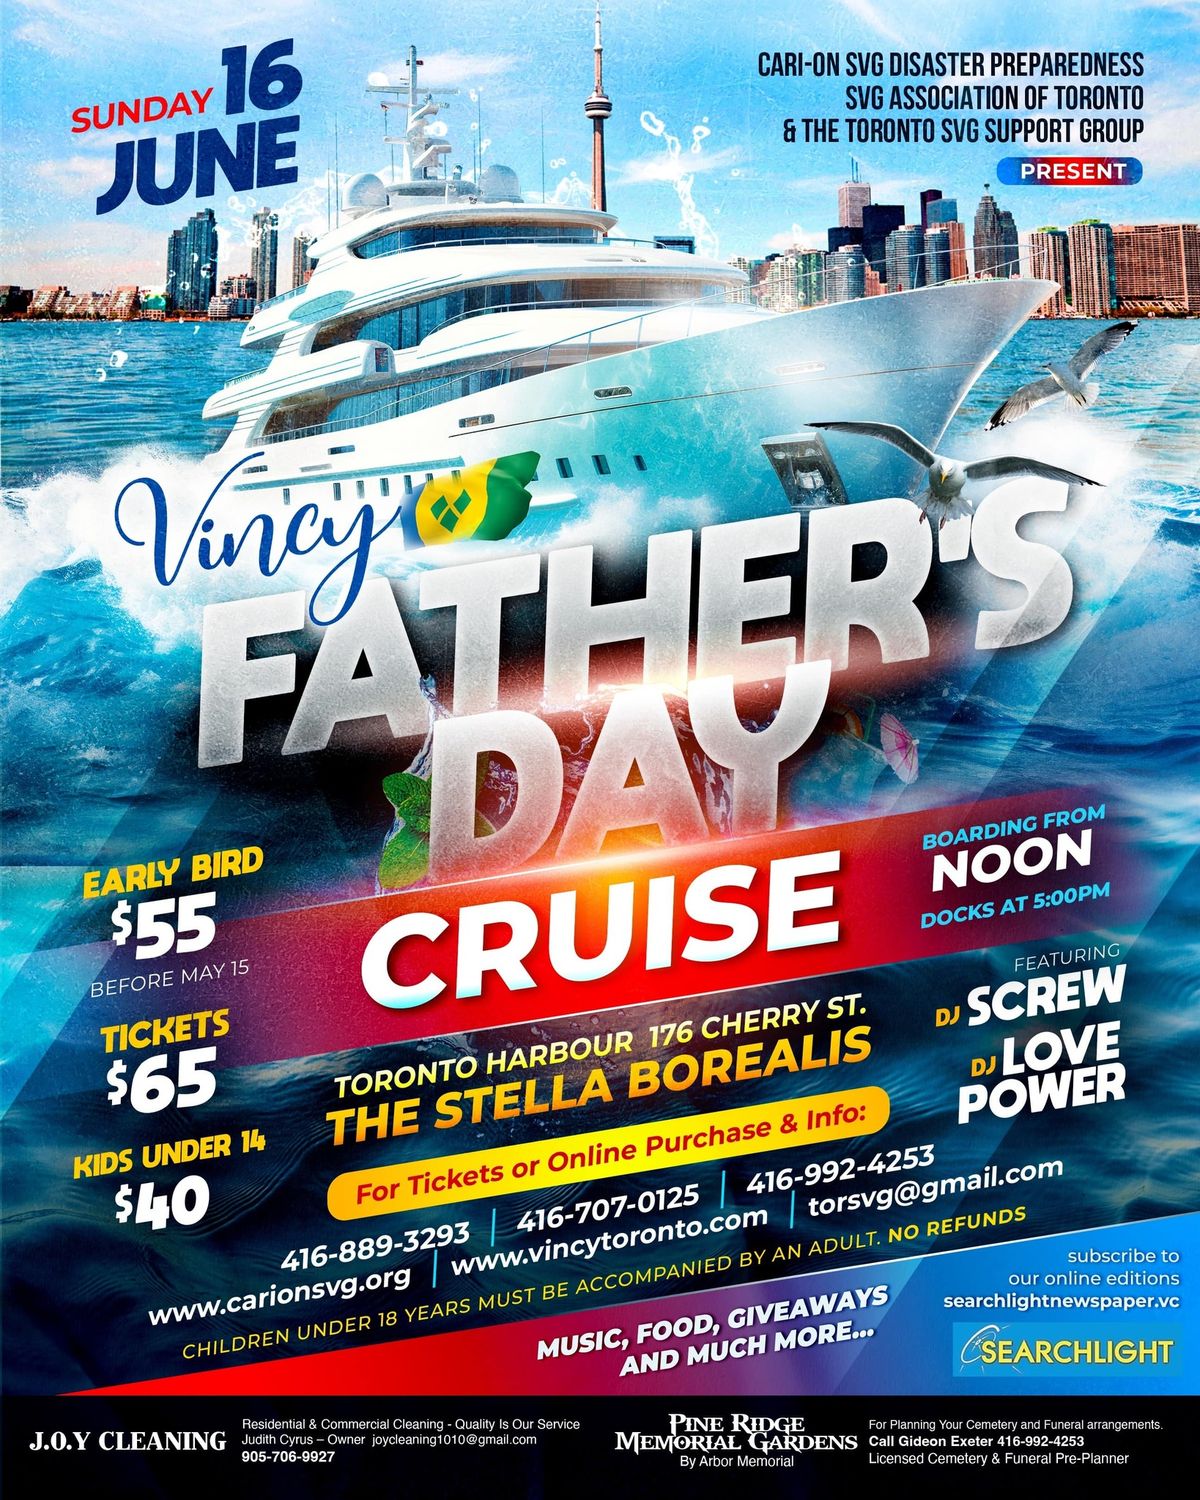 Vincy Fathers' Day Boat Cruise